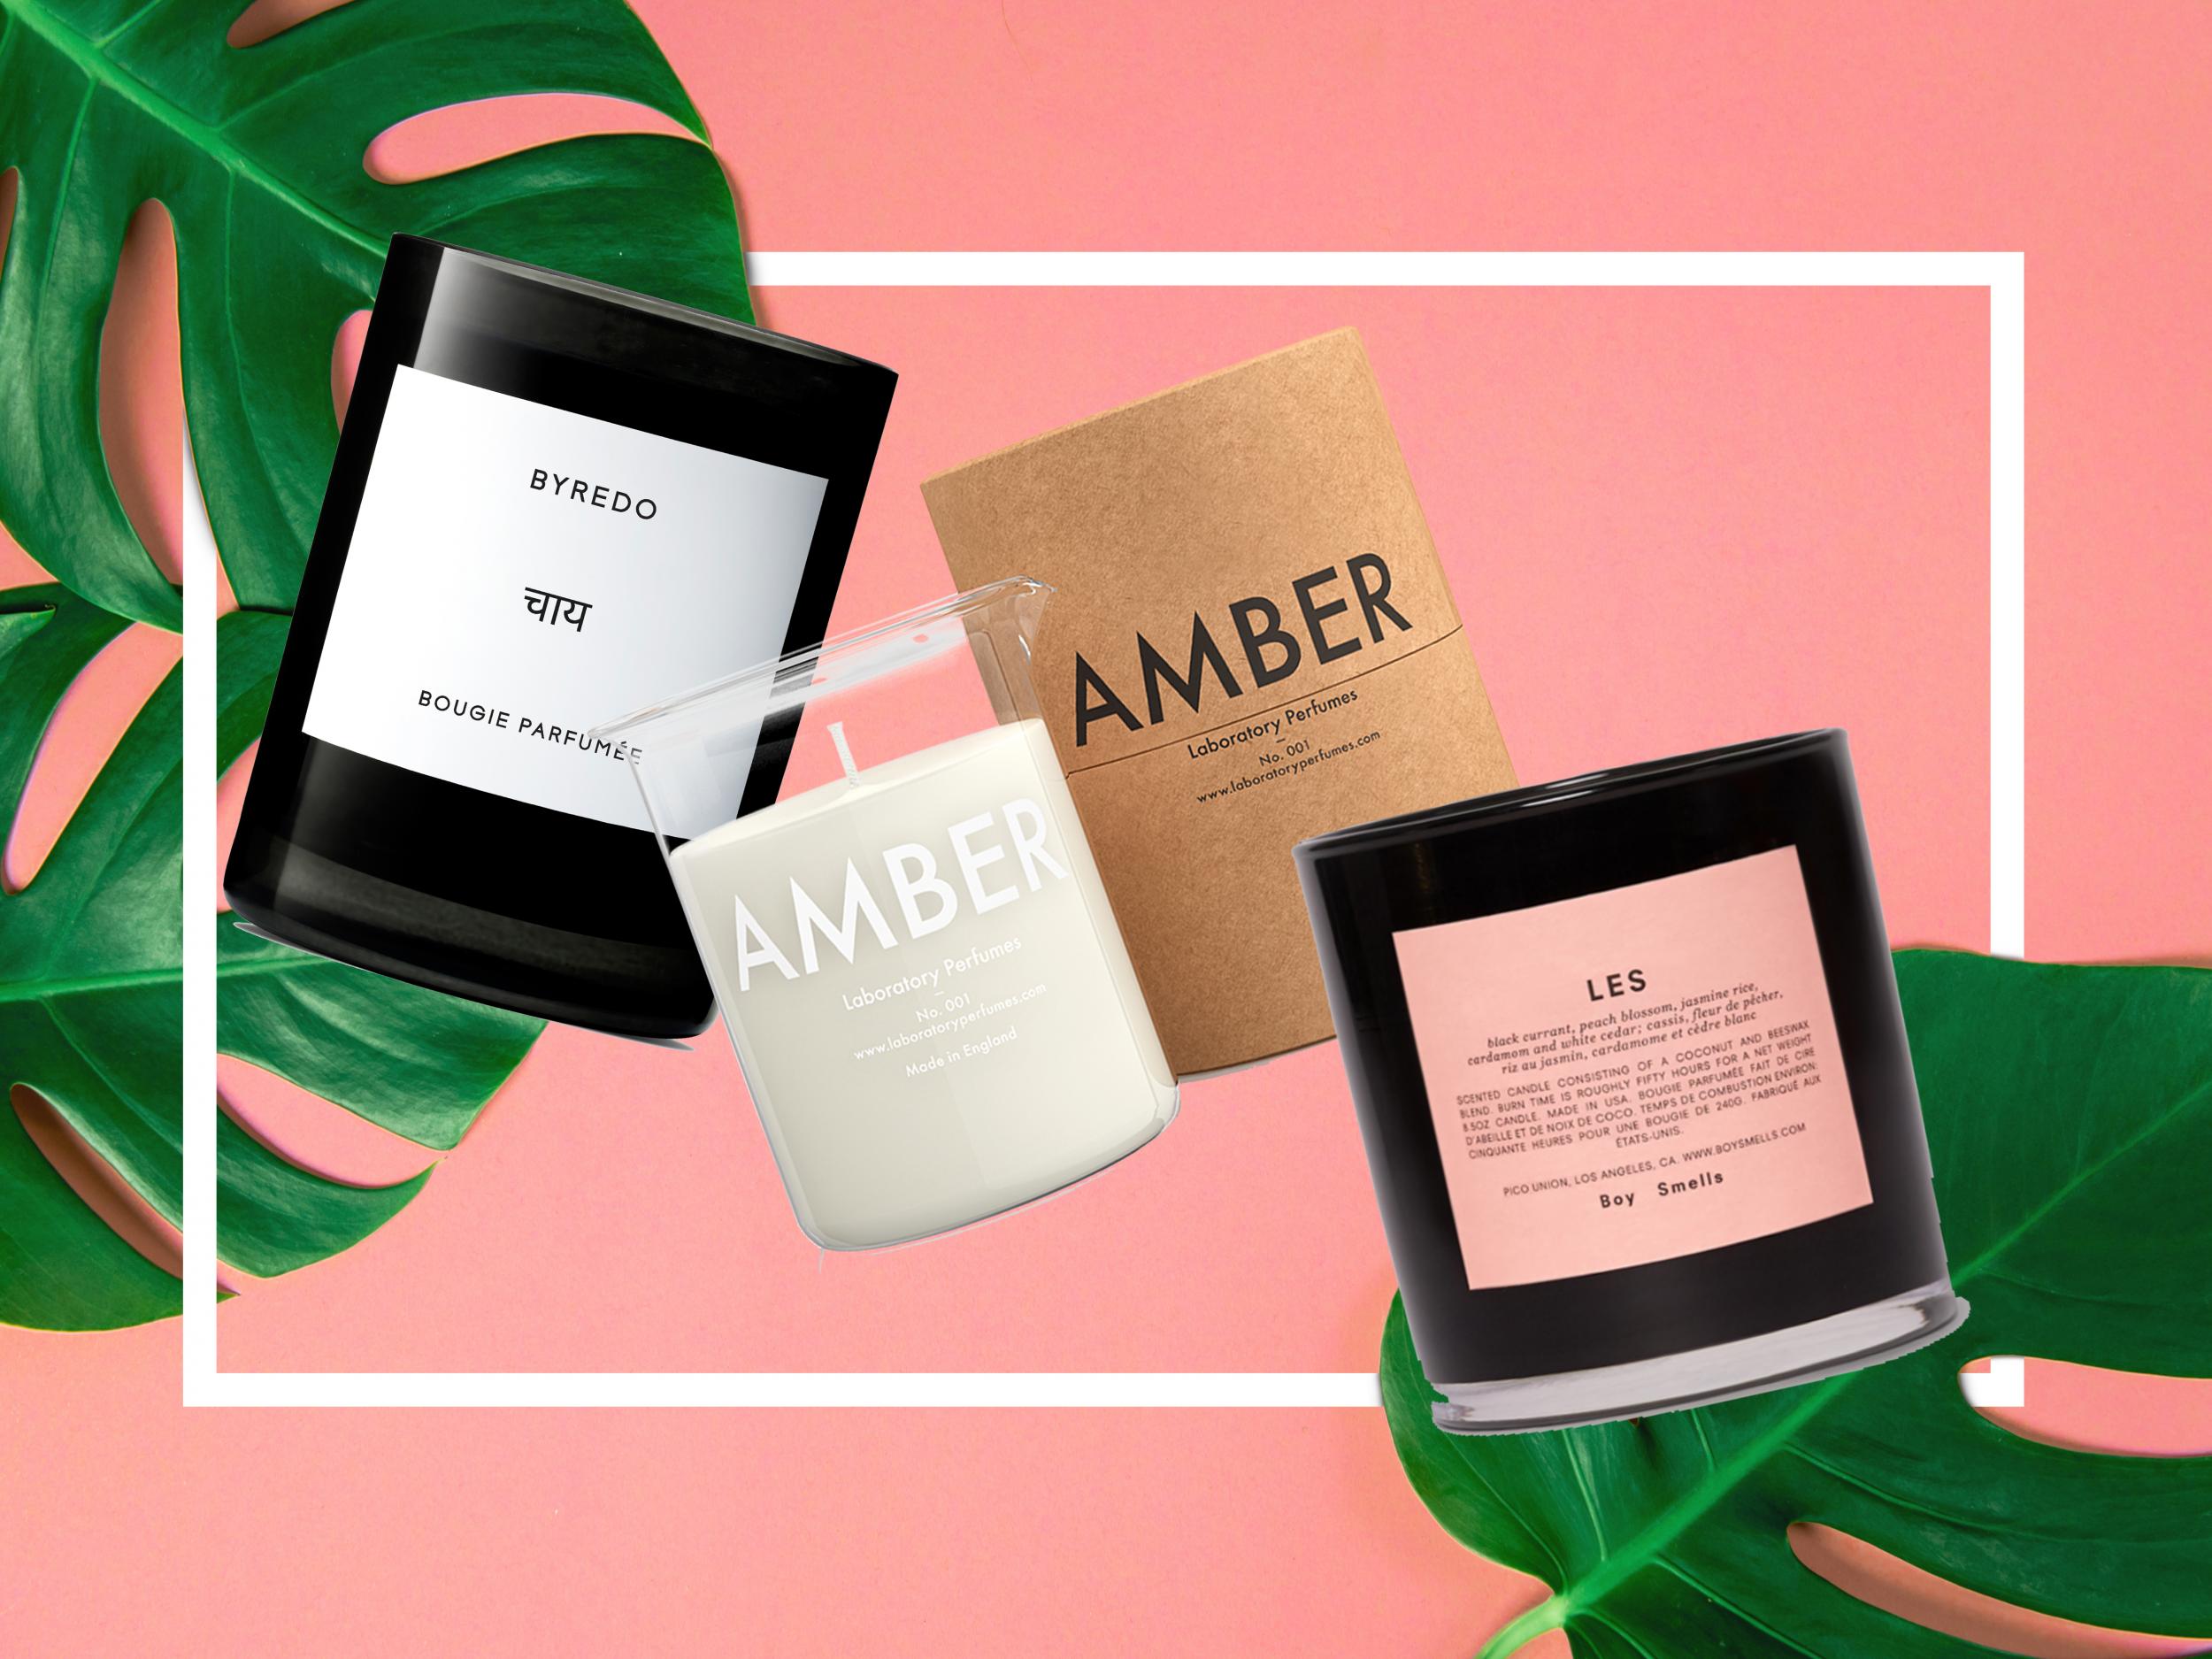 Burn, baby, burn to release lively, fresh perfumes that will fill the room and boost your mood